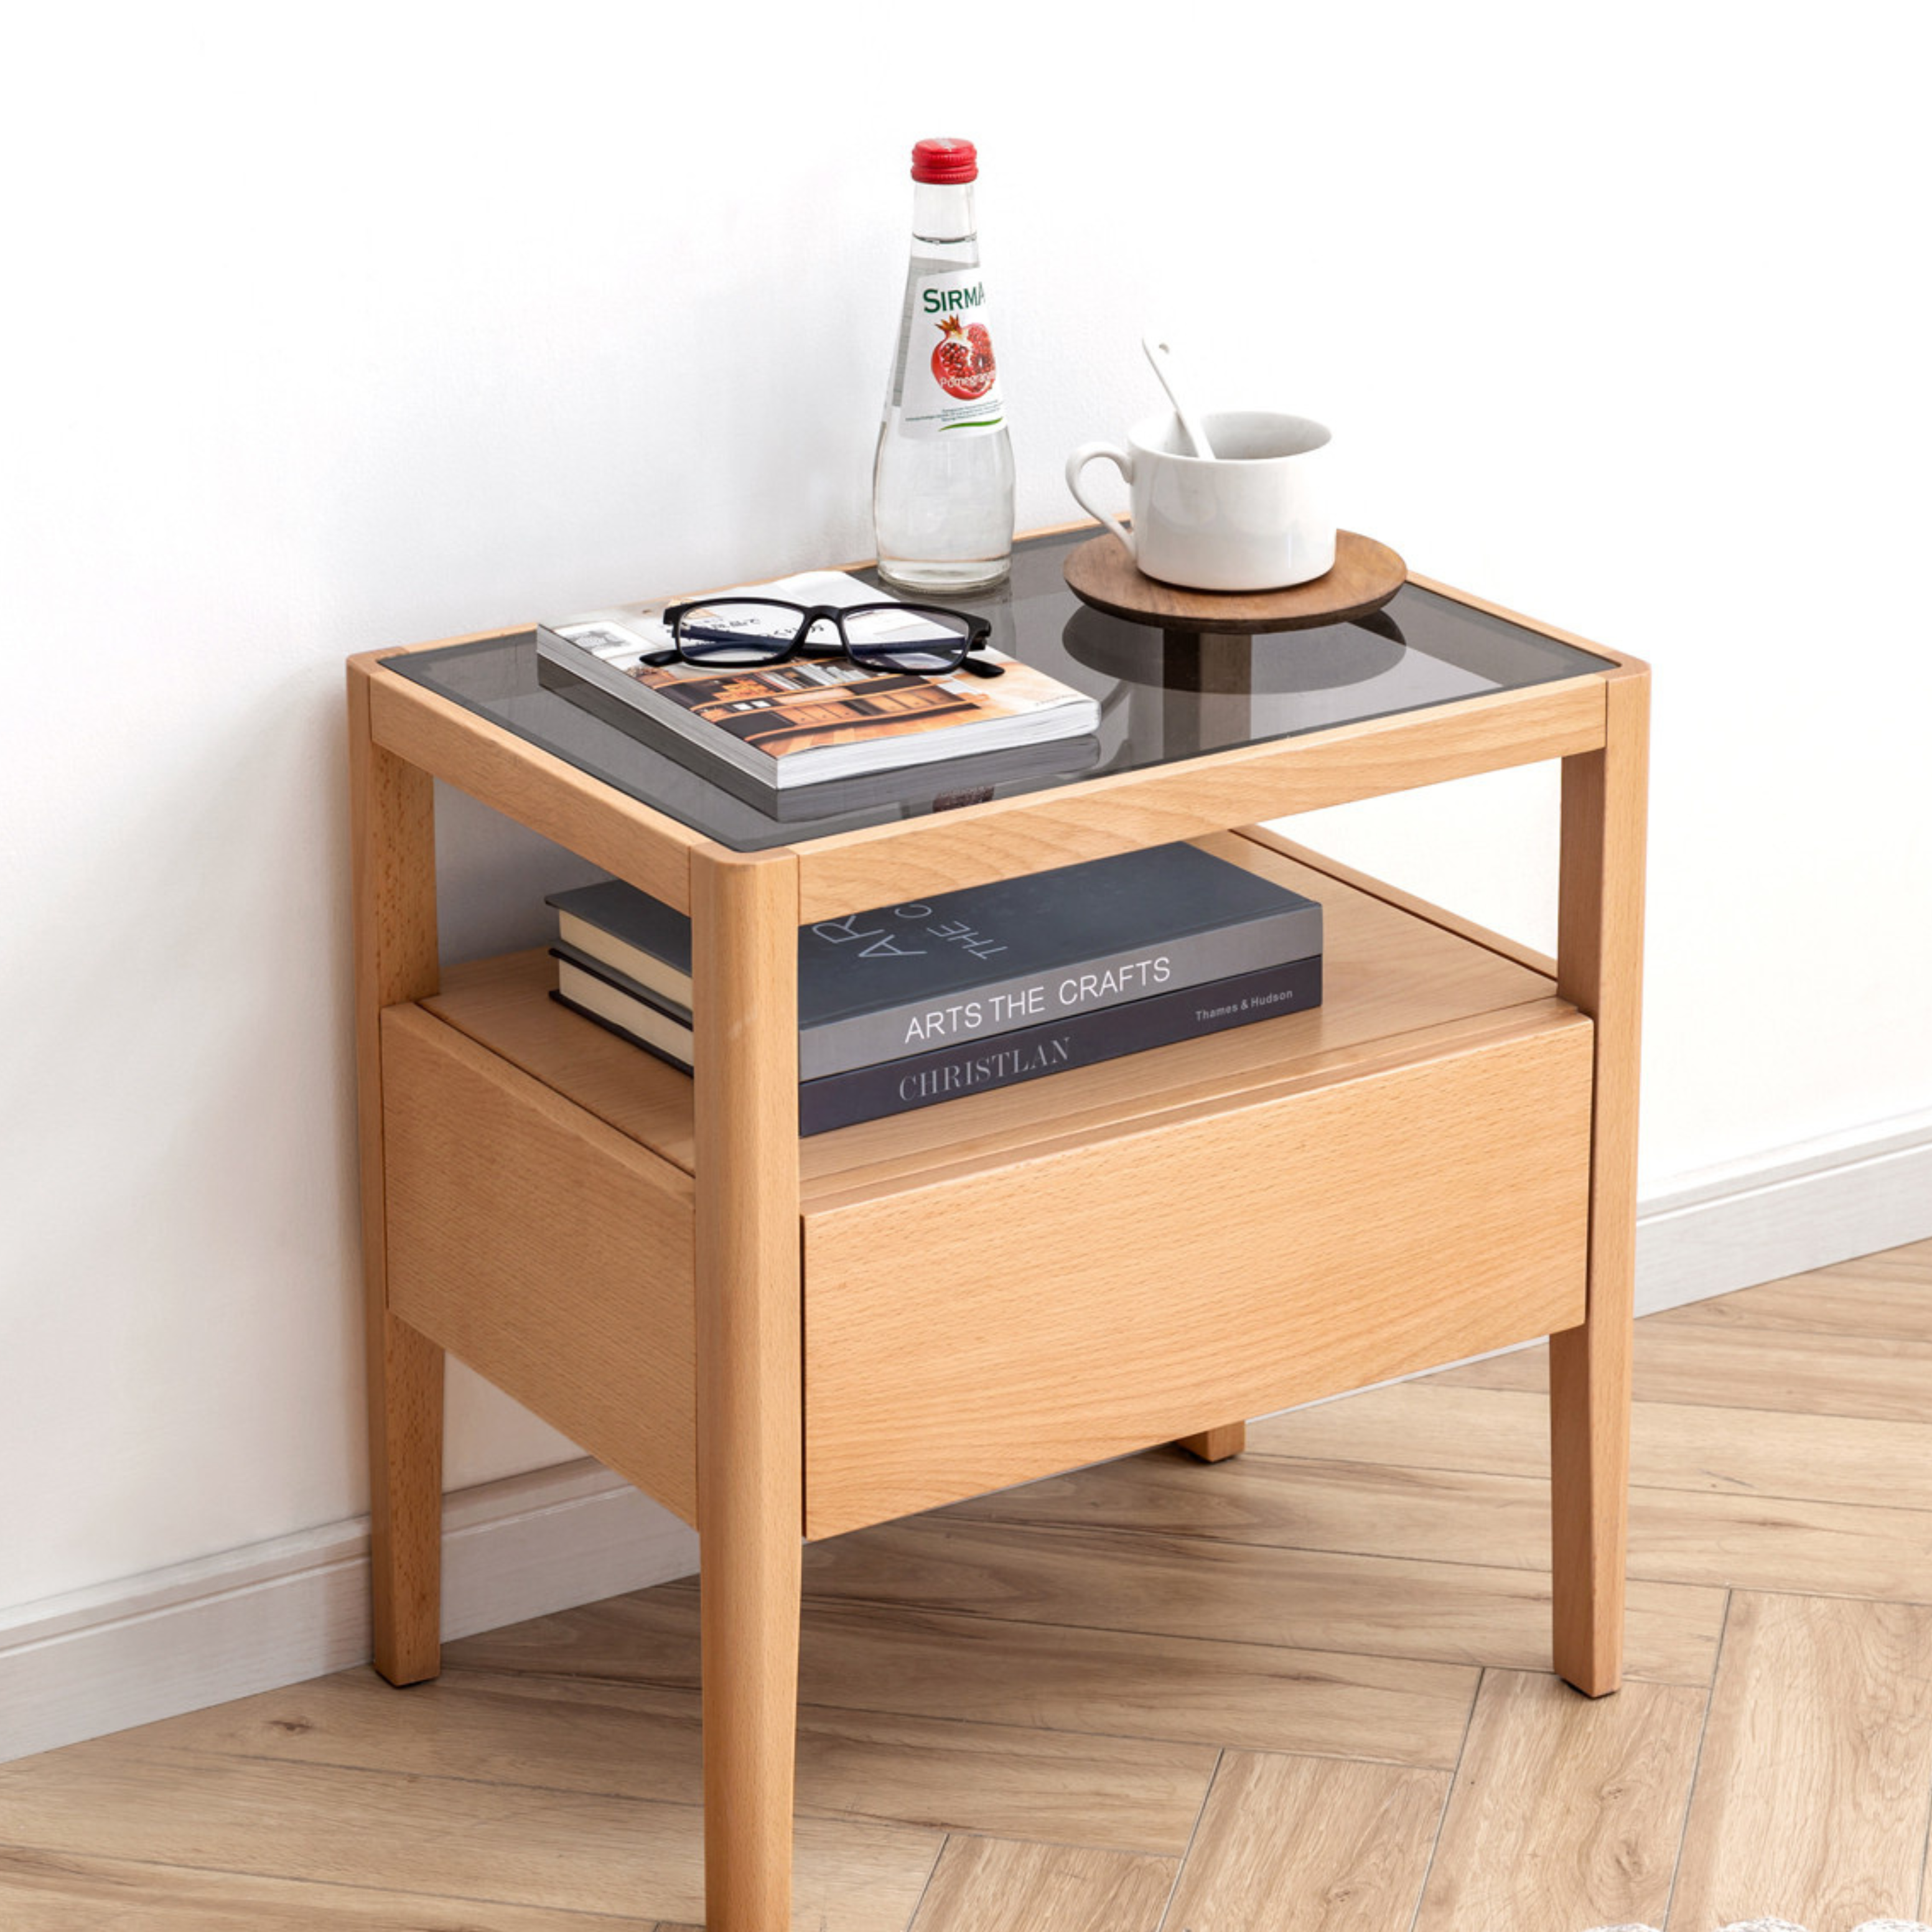 Beech solid wood bedside storage, small side table)